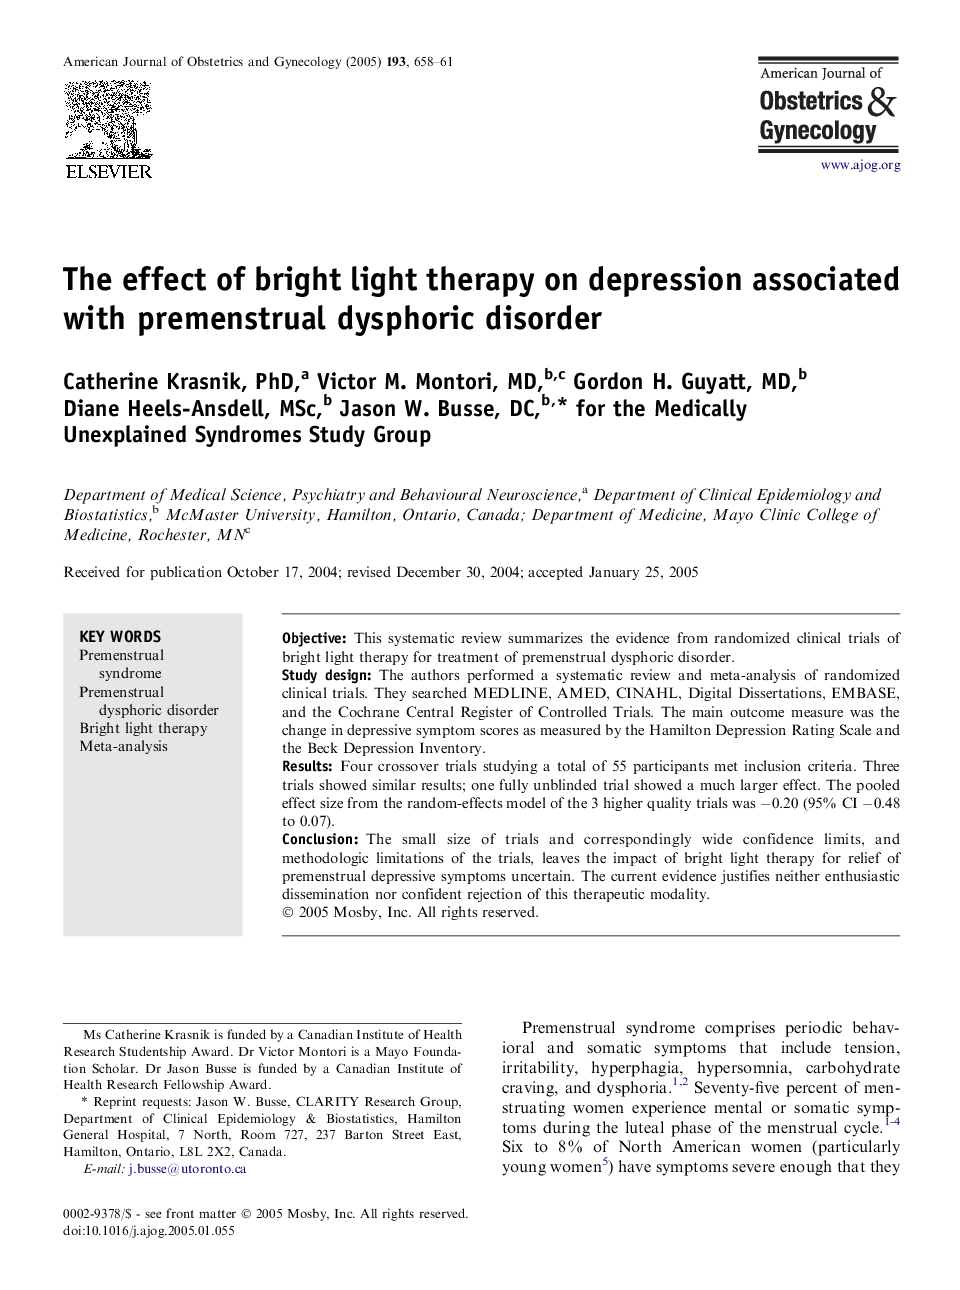 The effect of bright light therapy on depression associated with premenstrual dysphoric disorder